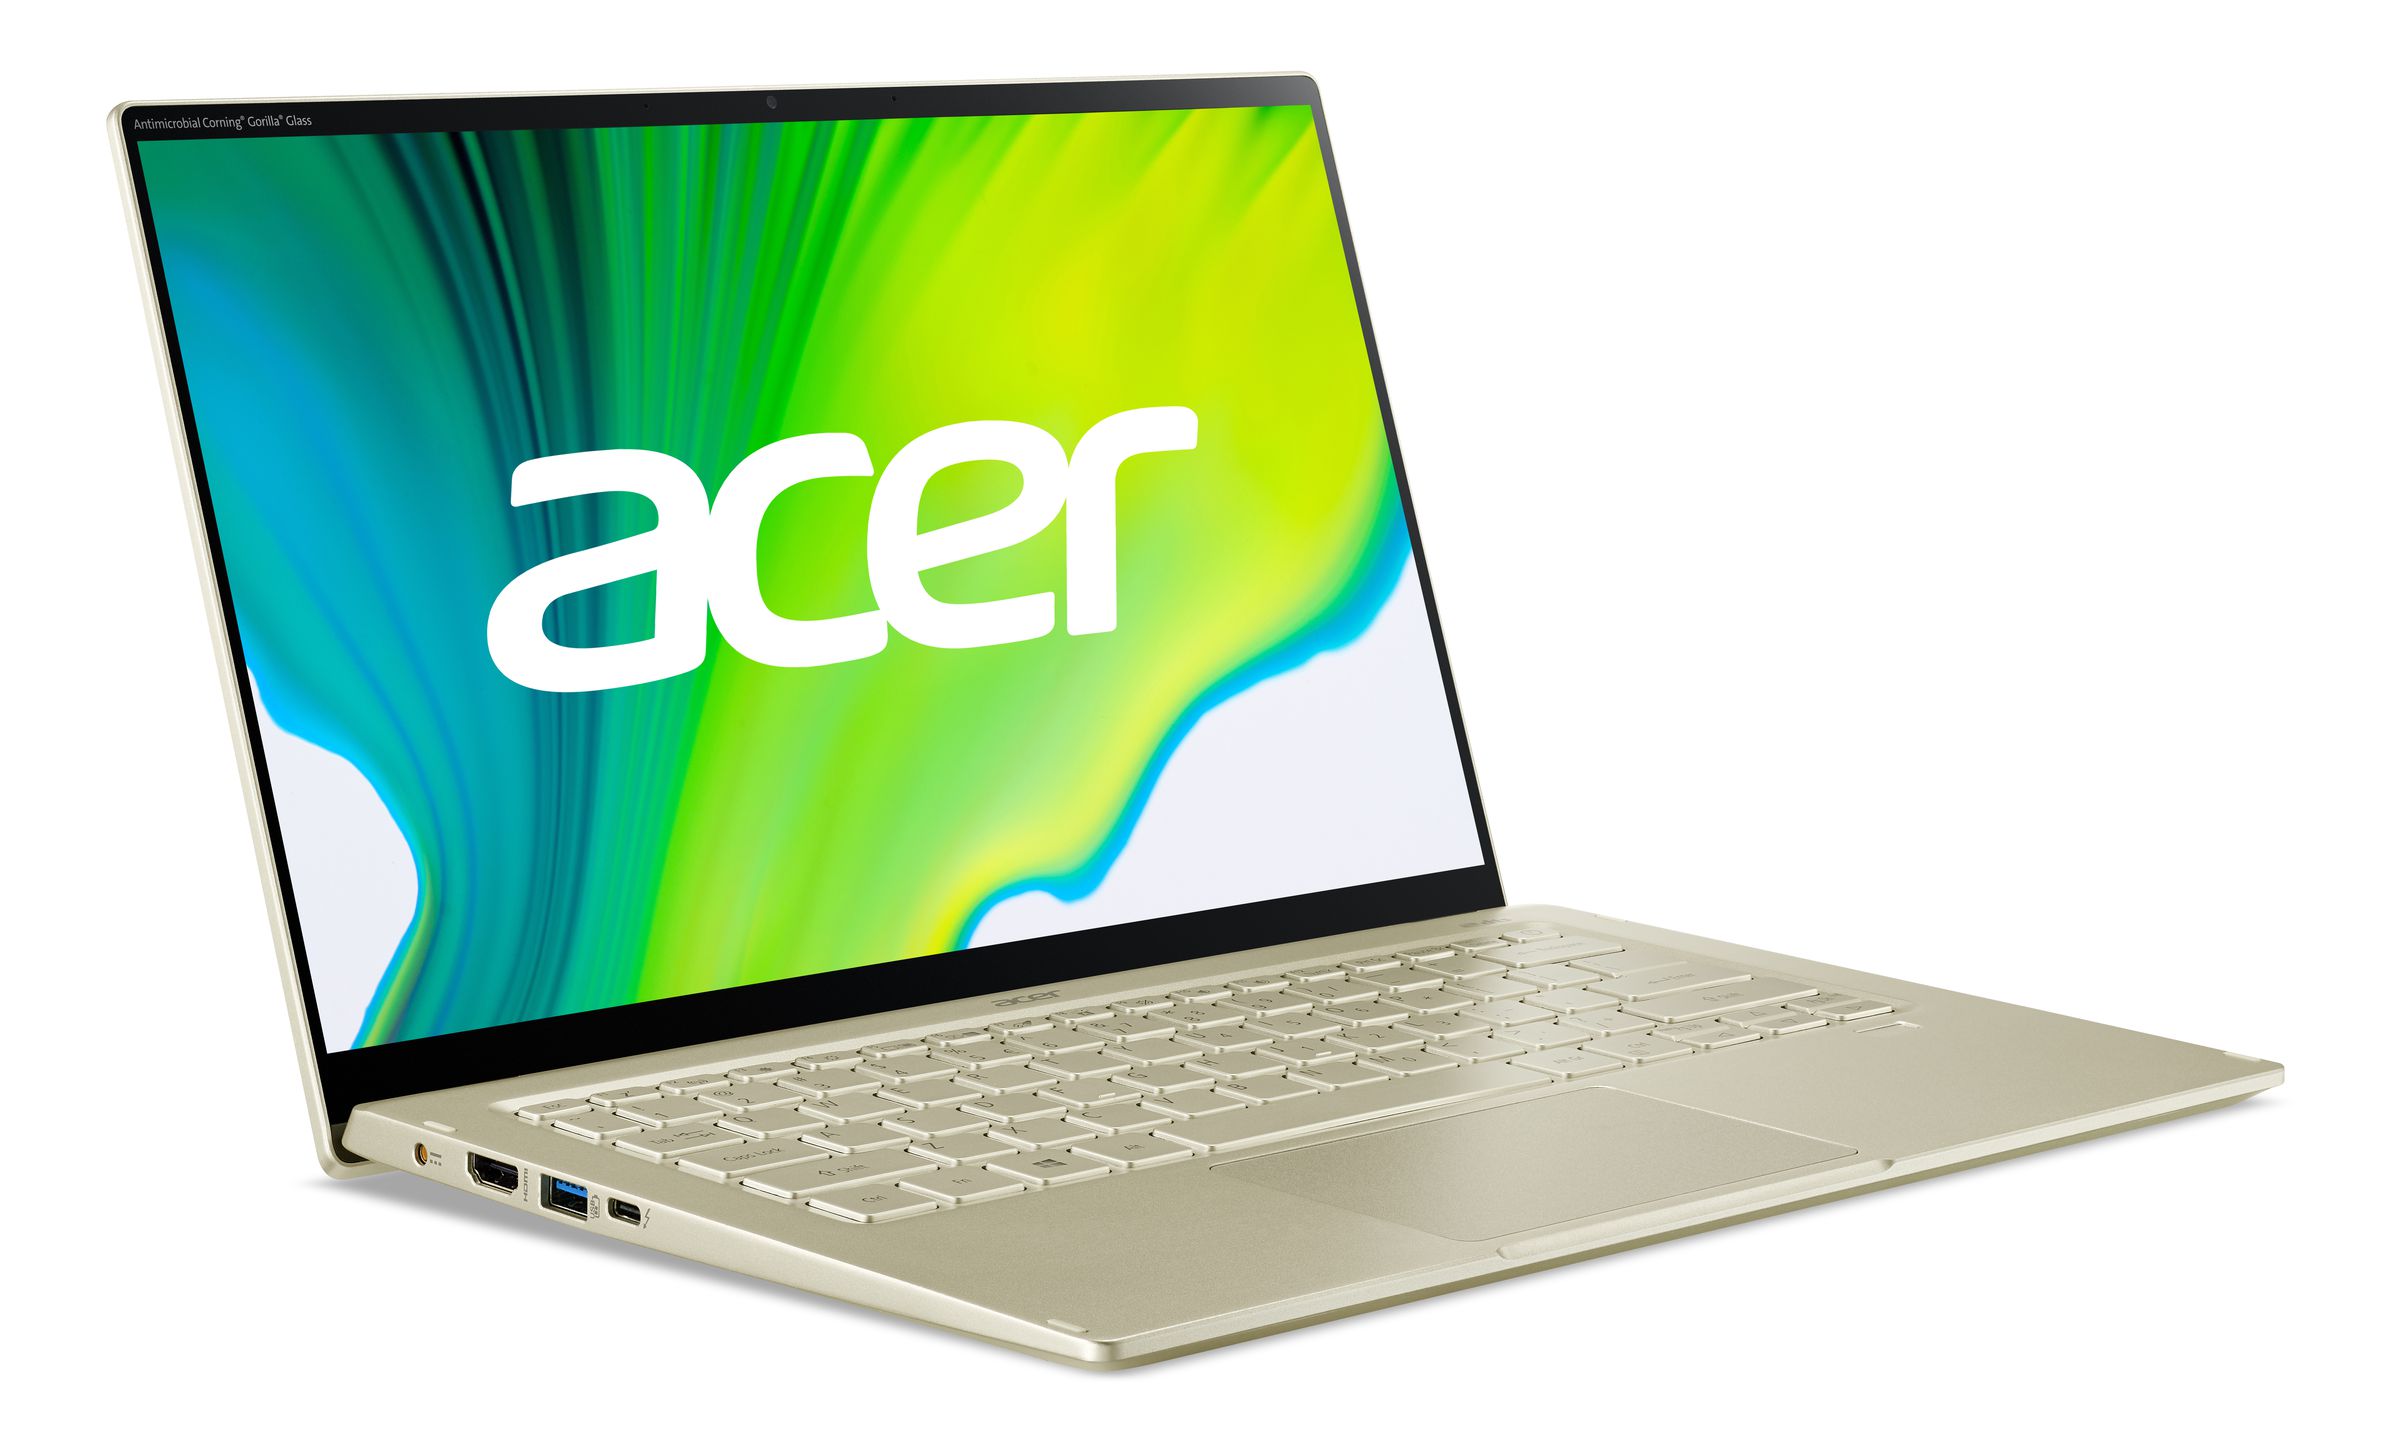 The Acer Swift 5.